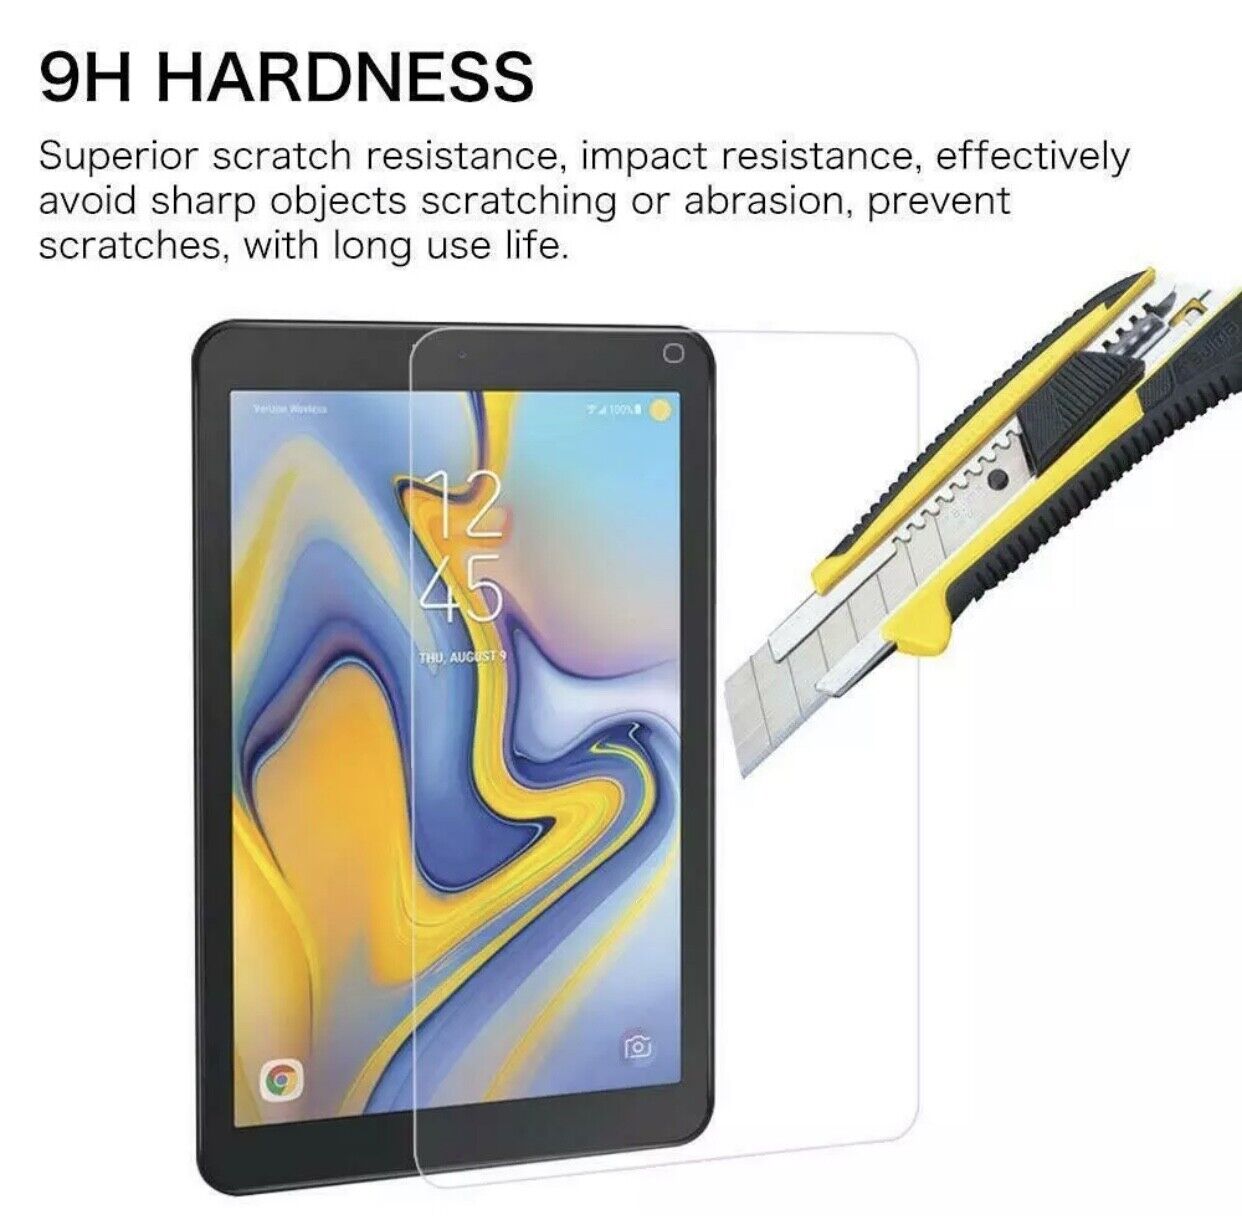 3 PACK Tempered Glass Screen Protector for Samsung Galaxy Tab A 8.0 2018 SM-T387 Unbranded T387-Tempered-Glass-2pcs - фотография #5